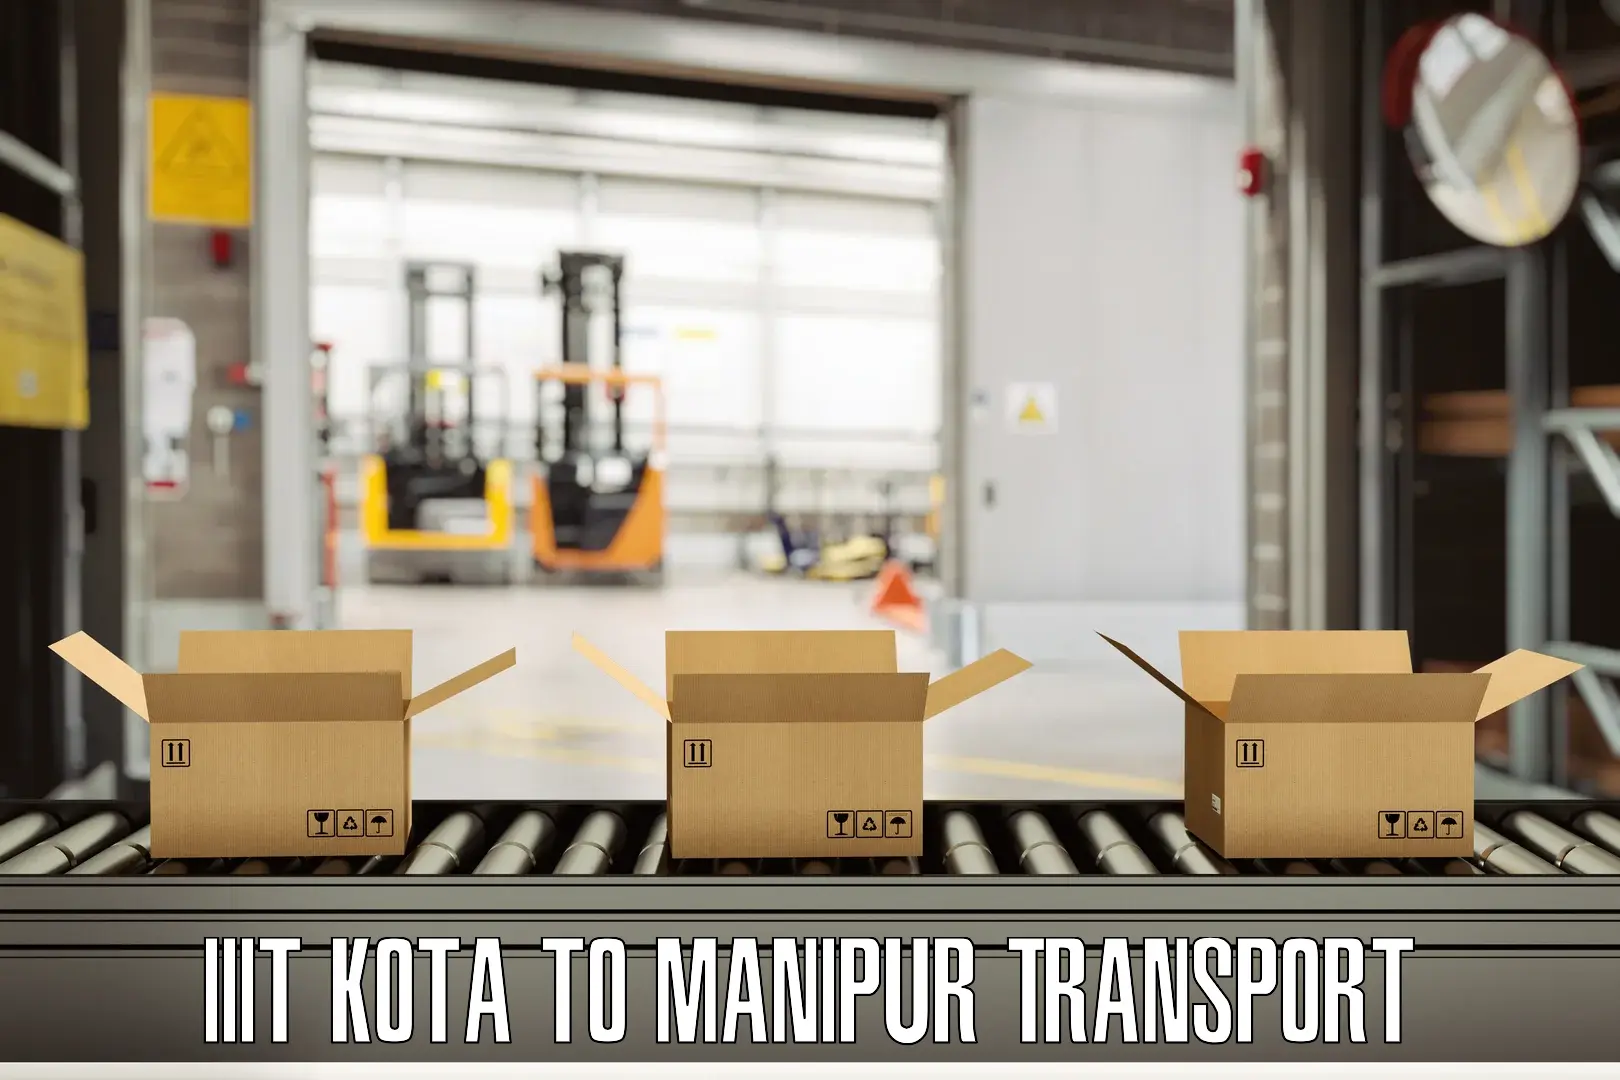 Best transport services in India in IIIT Kota to Manipur